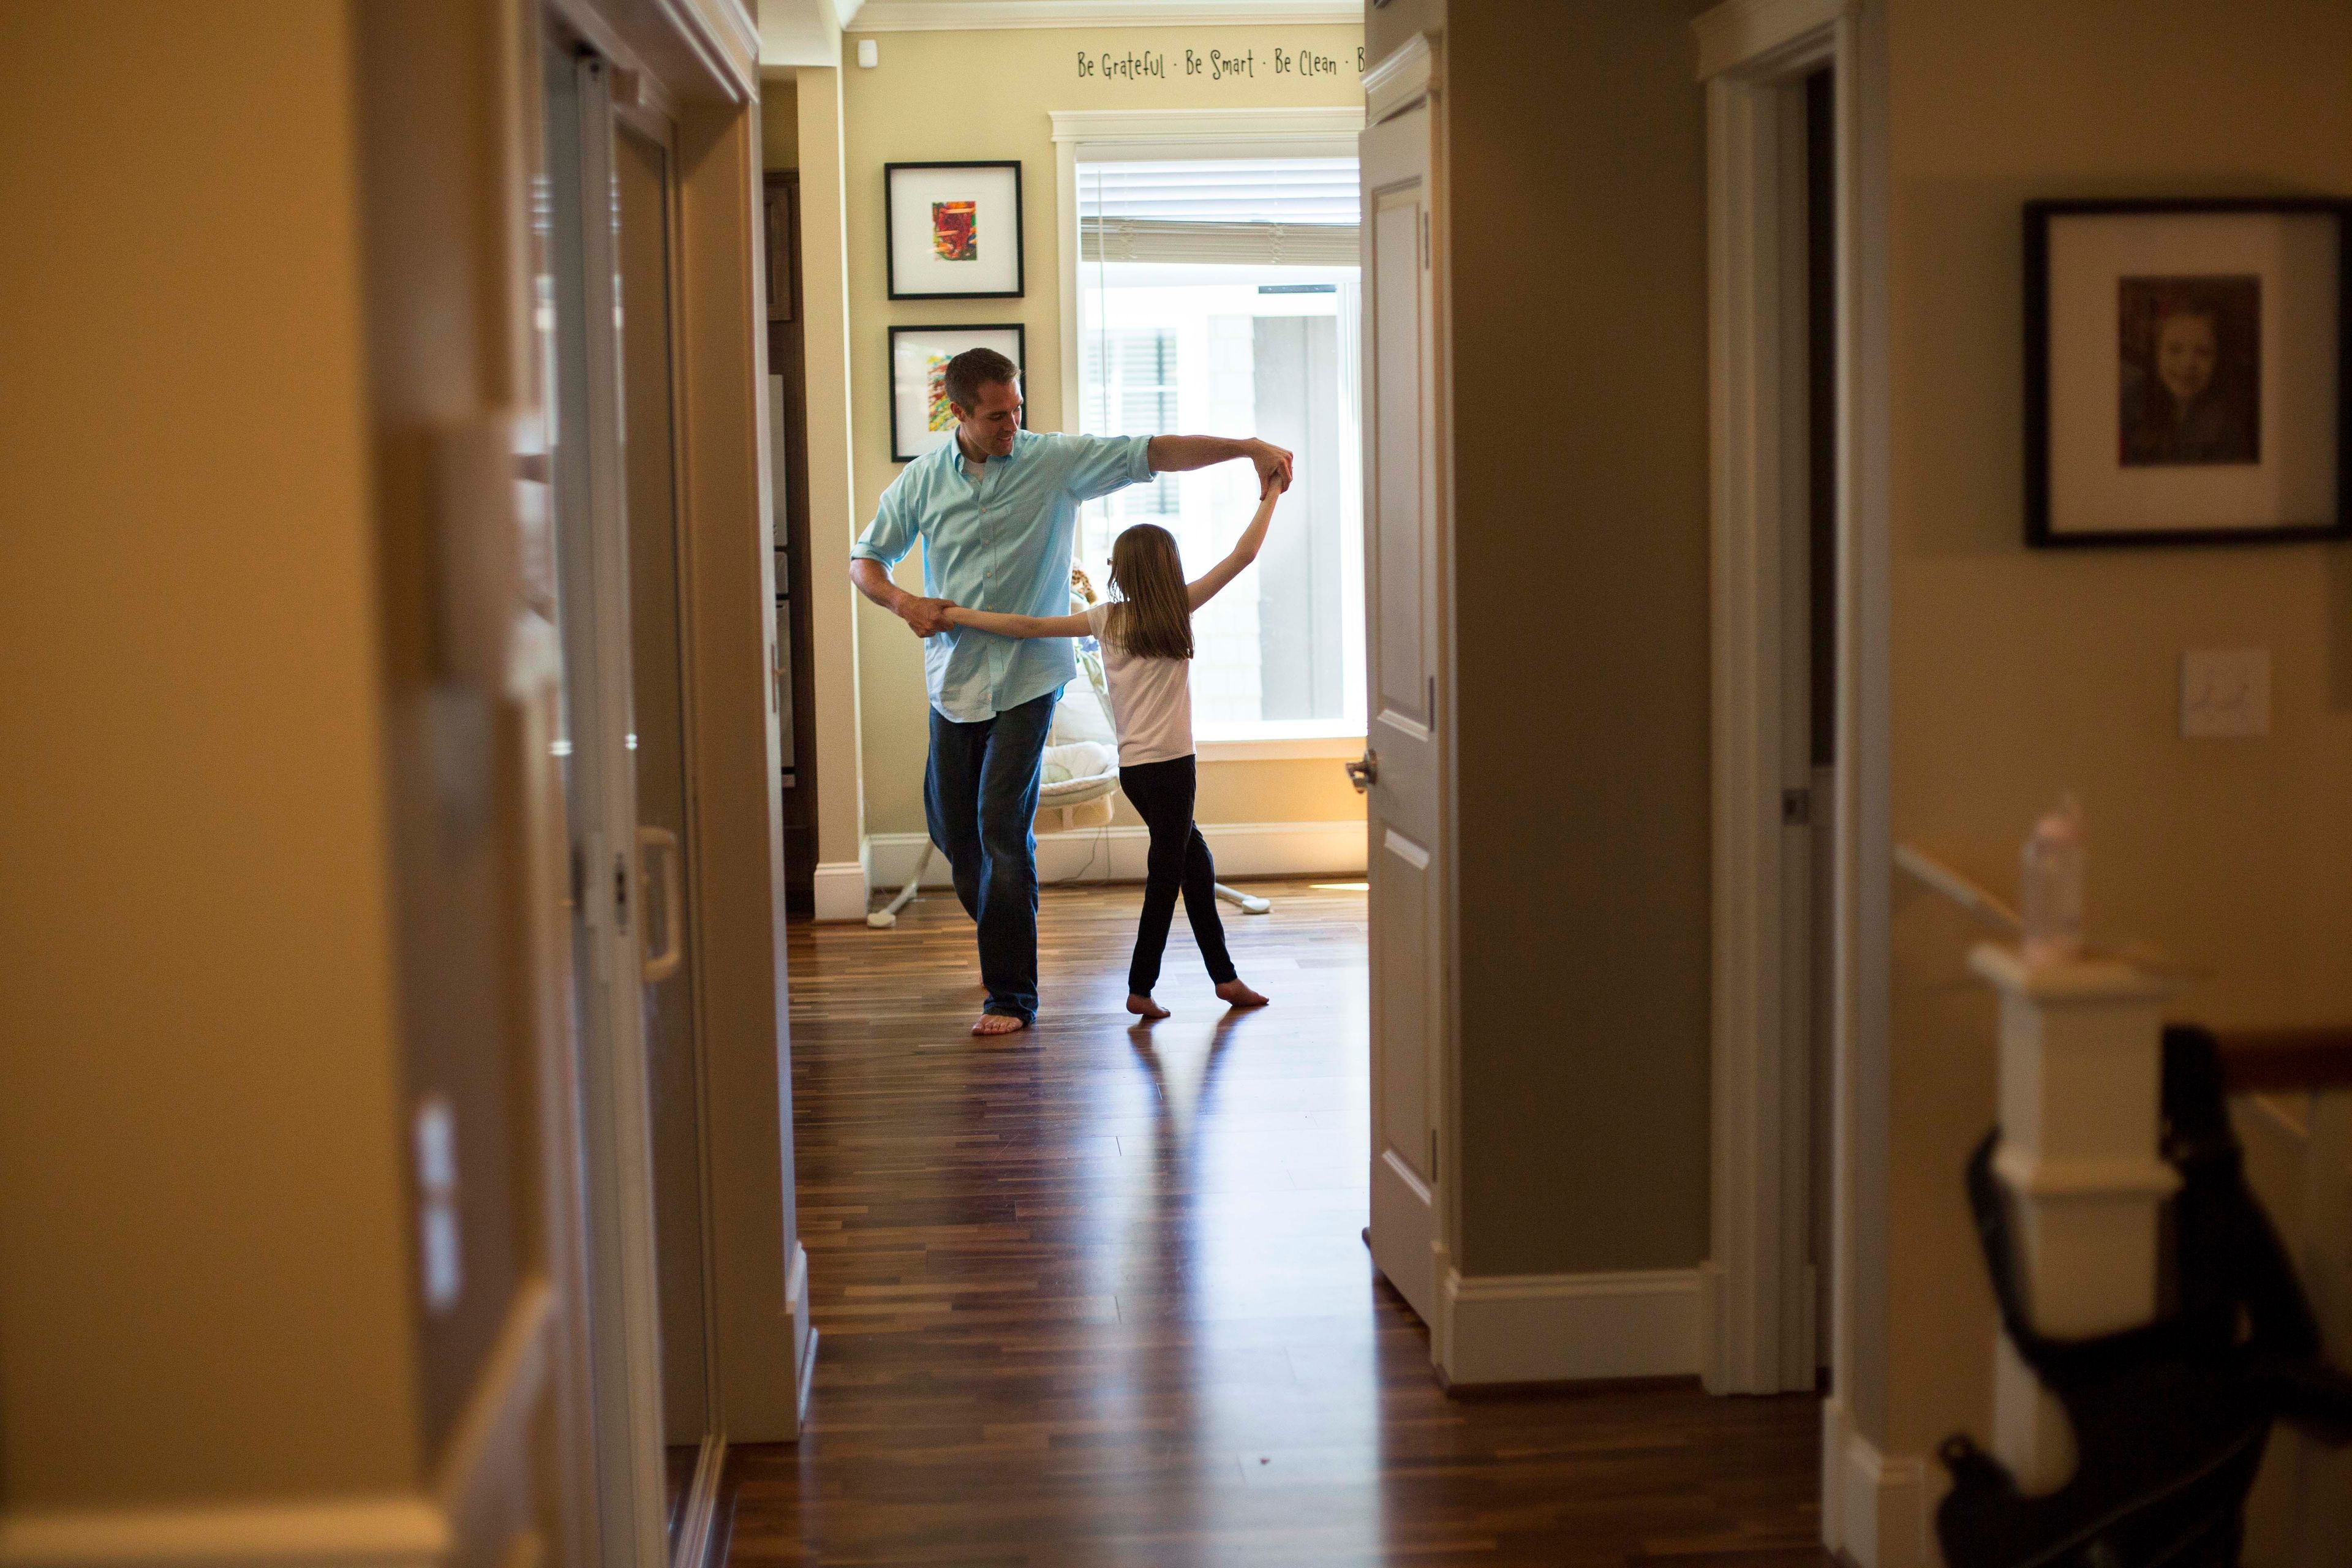 A father dances with his daughter in their home.